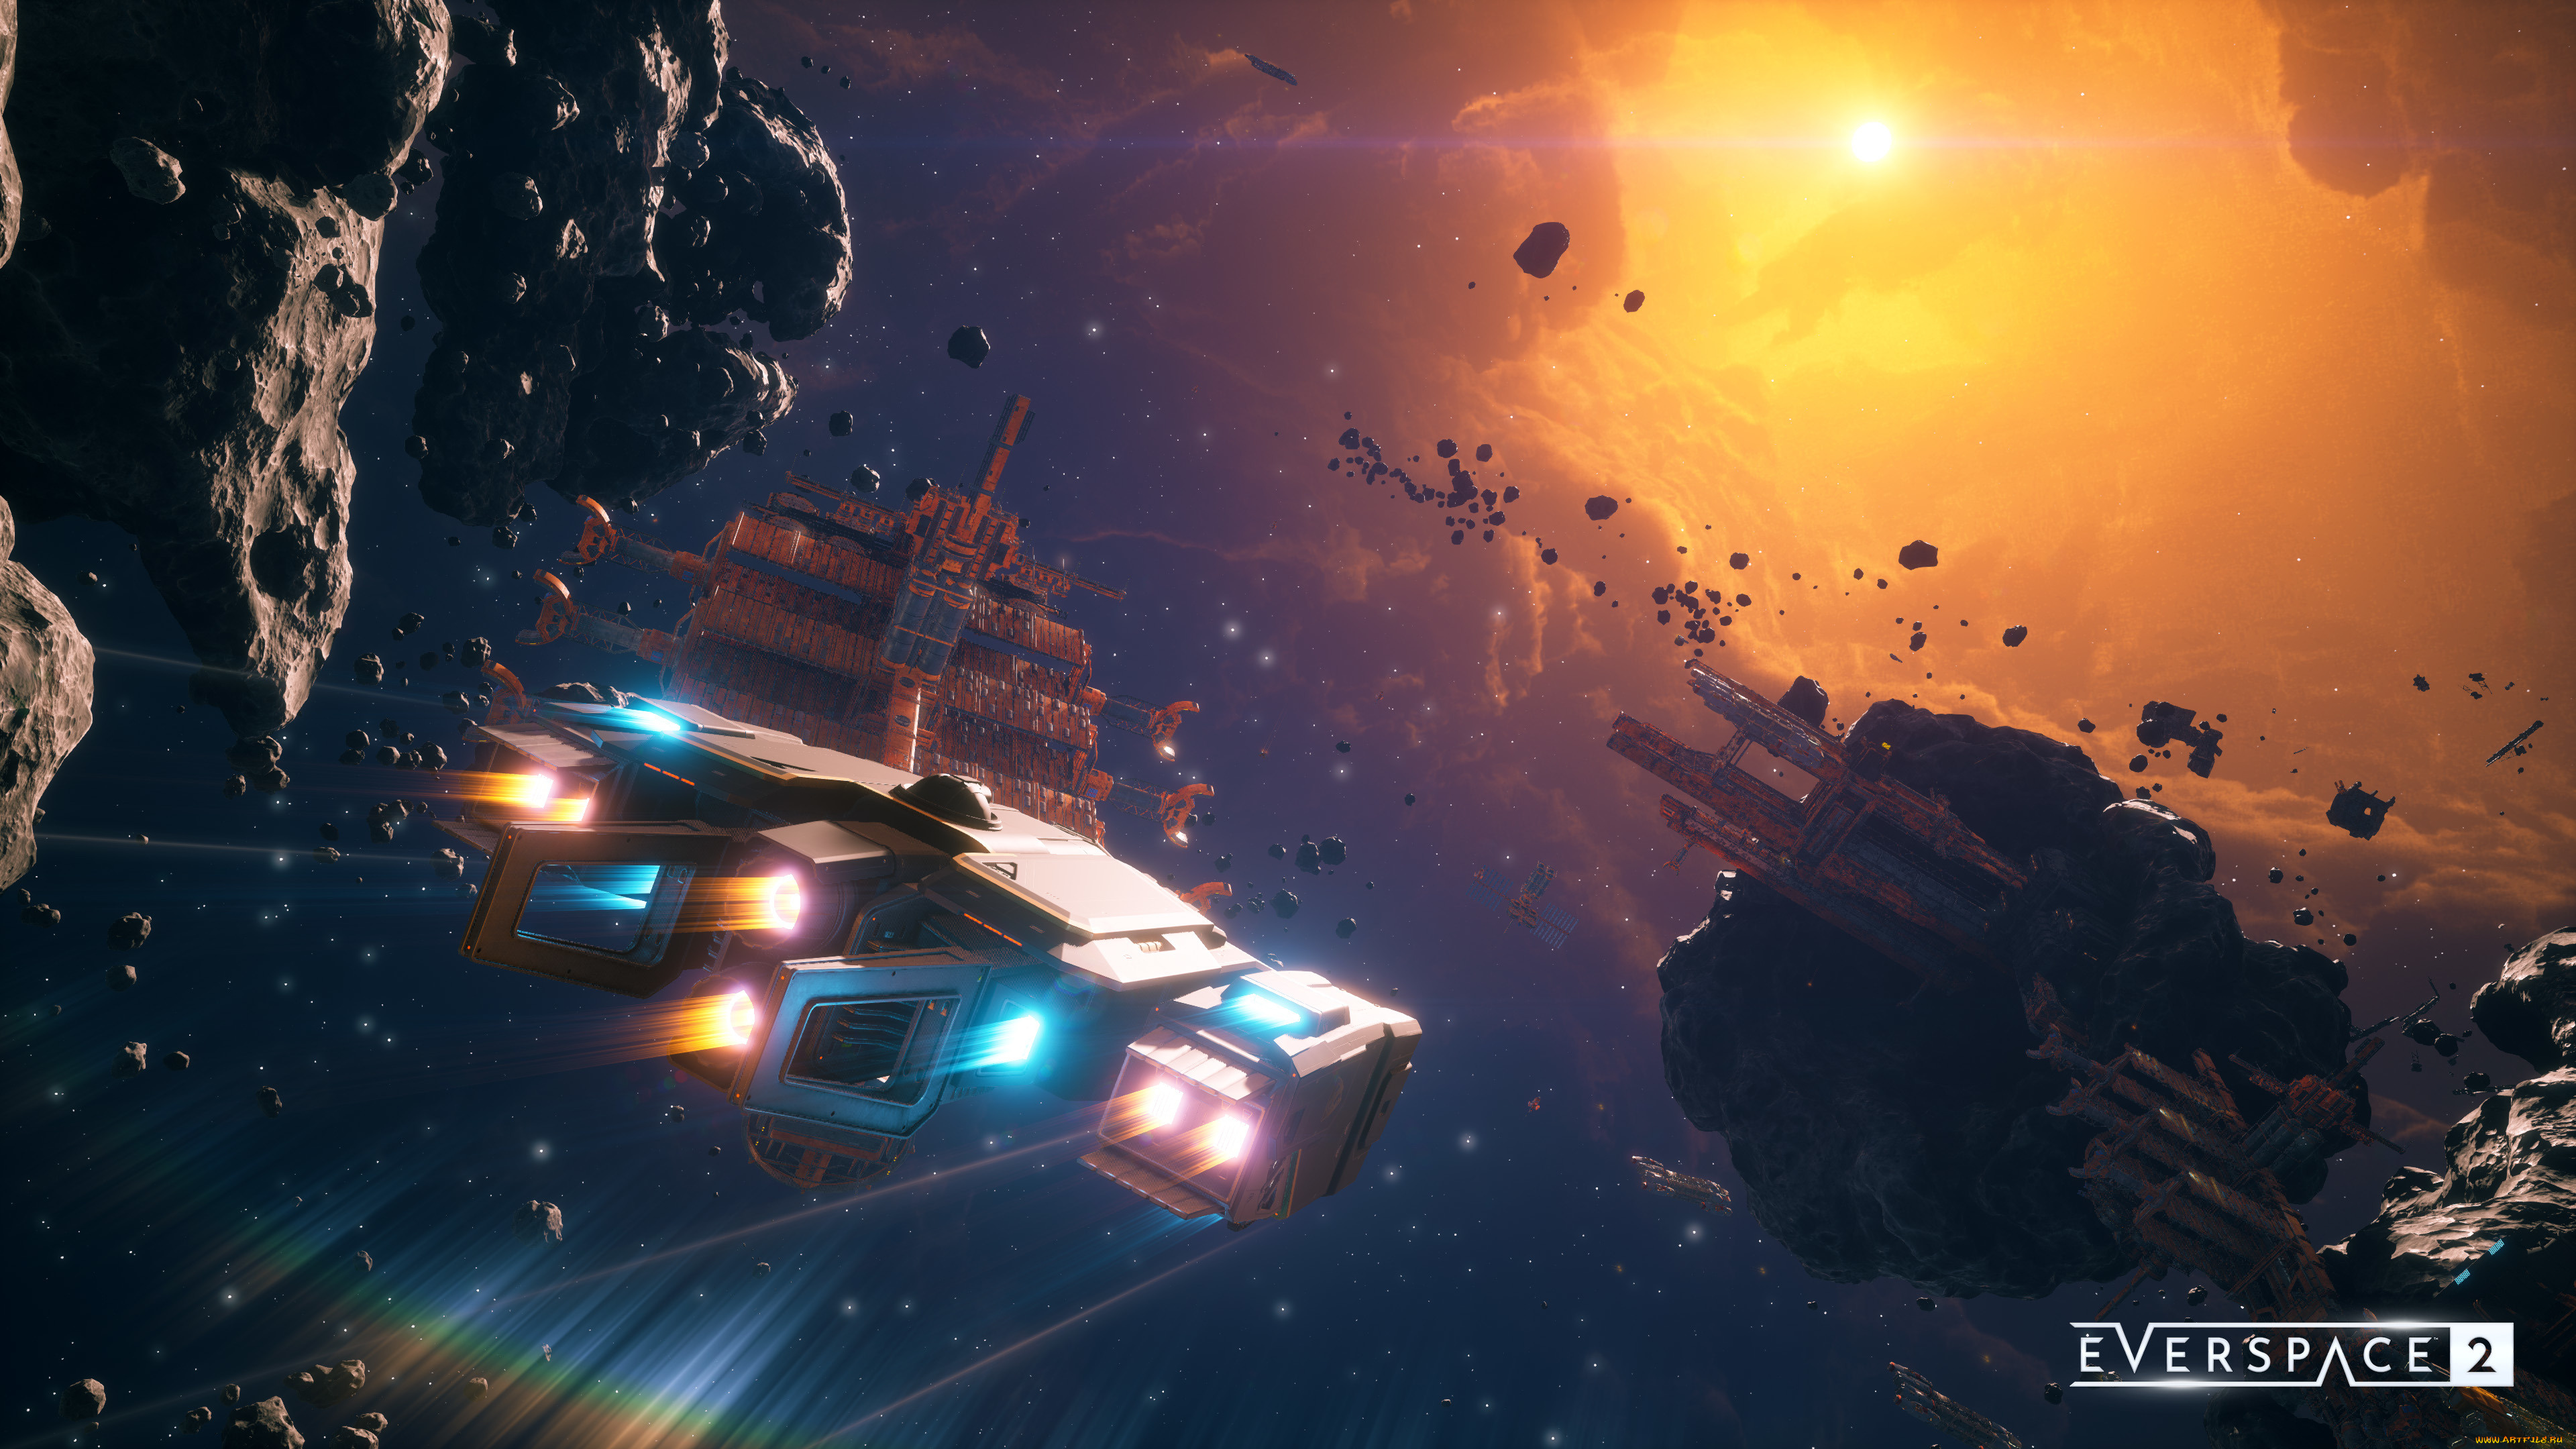 Accessed space. Еверспейс 2. Everspace игра. Everspace 2 дредноут. Everspace 2. игра..